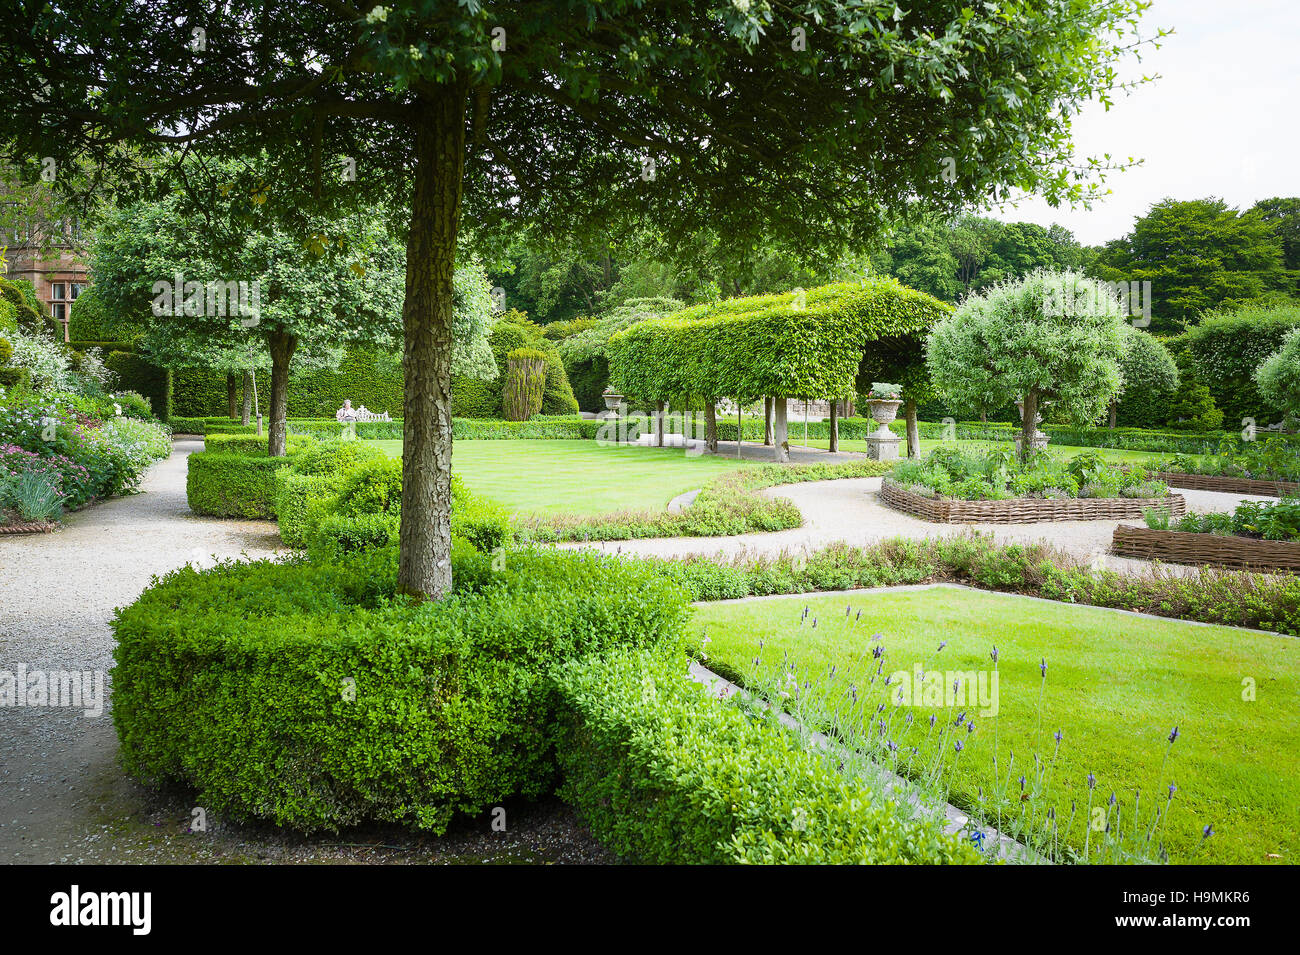 A garden landscape at Holker Hall in Cumbria UK Stock Photo